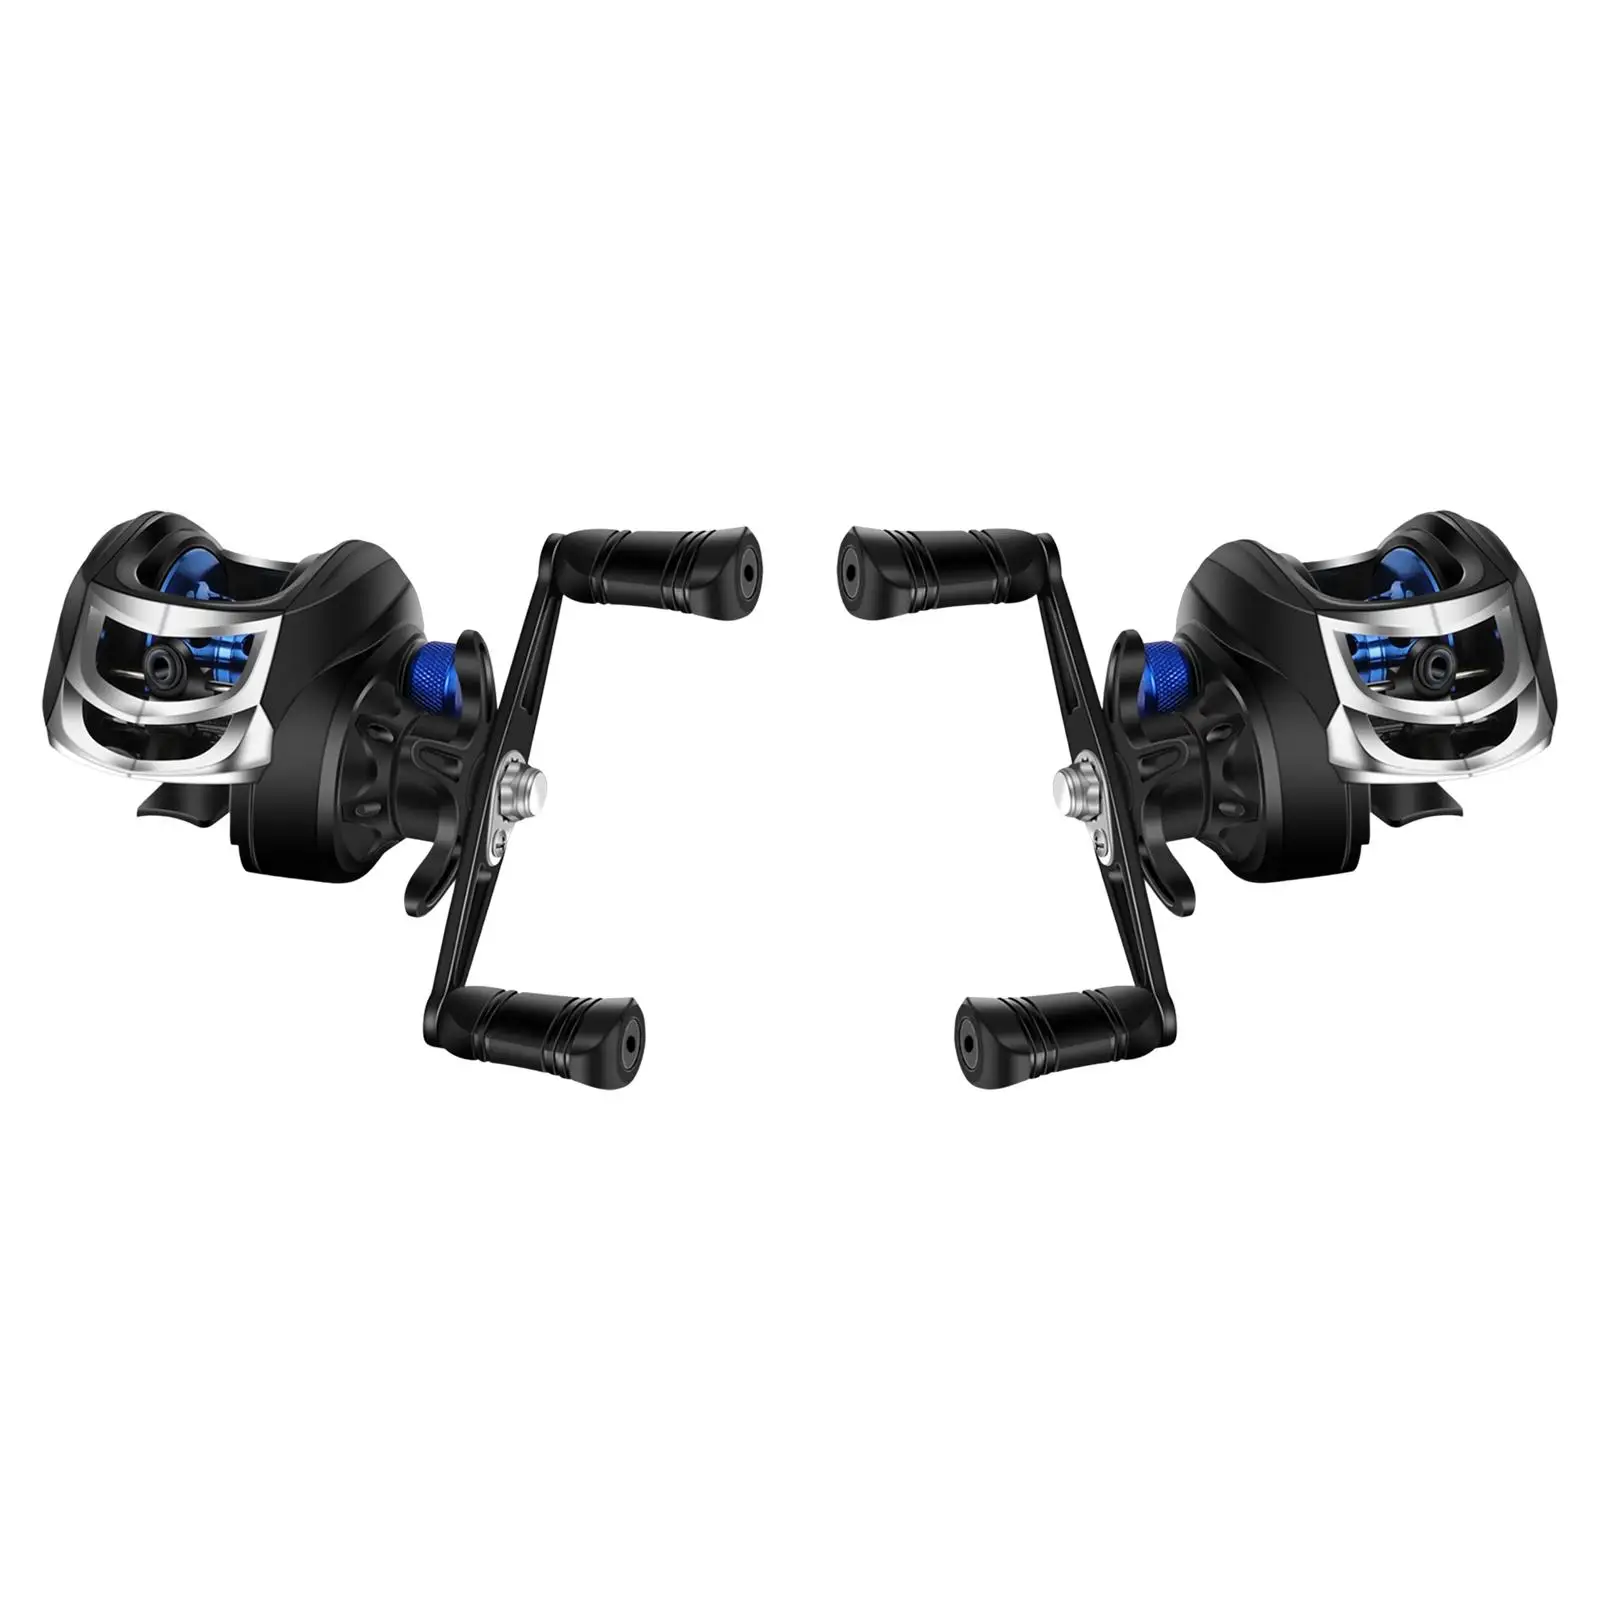 7.2:1 Gear Ratio Baitcasting Reel Sealed Drag System 8kg Max Drag Compact Design 9 Level Magnetic Brake for Fishing Supplies